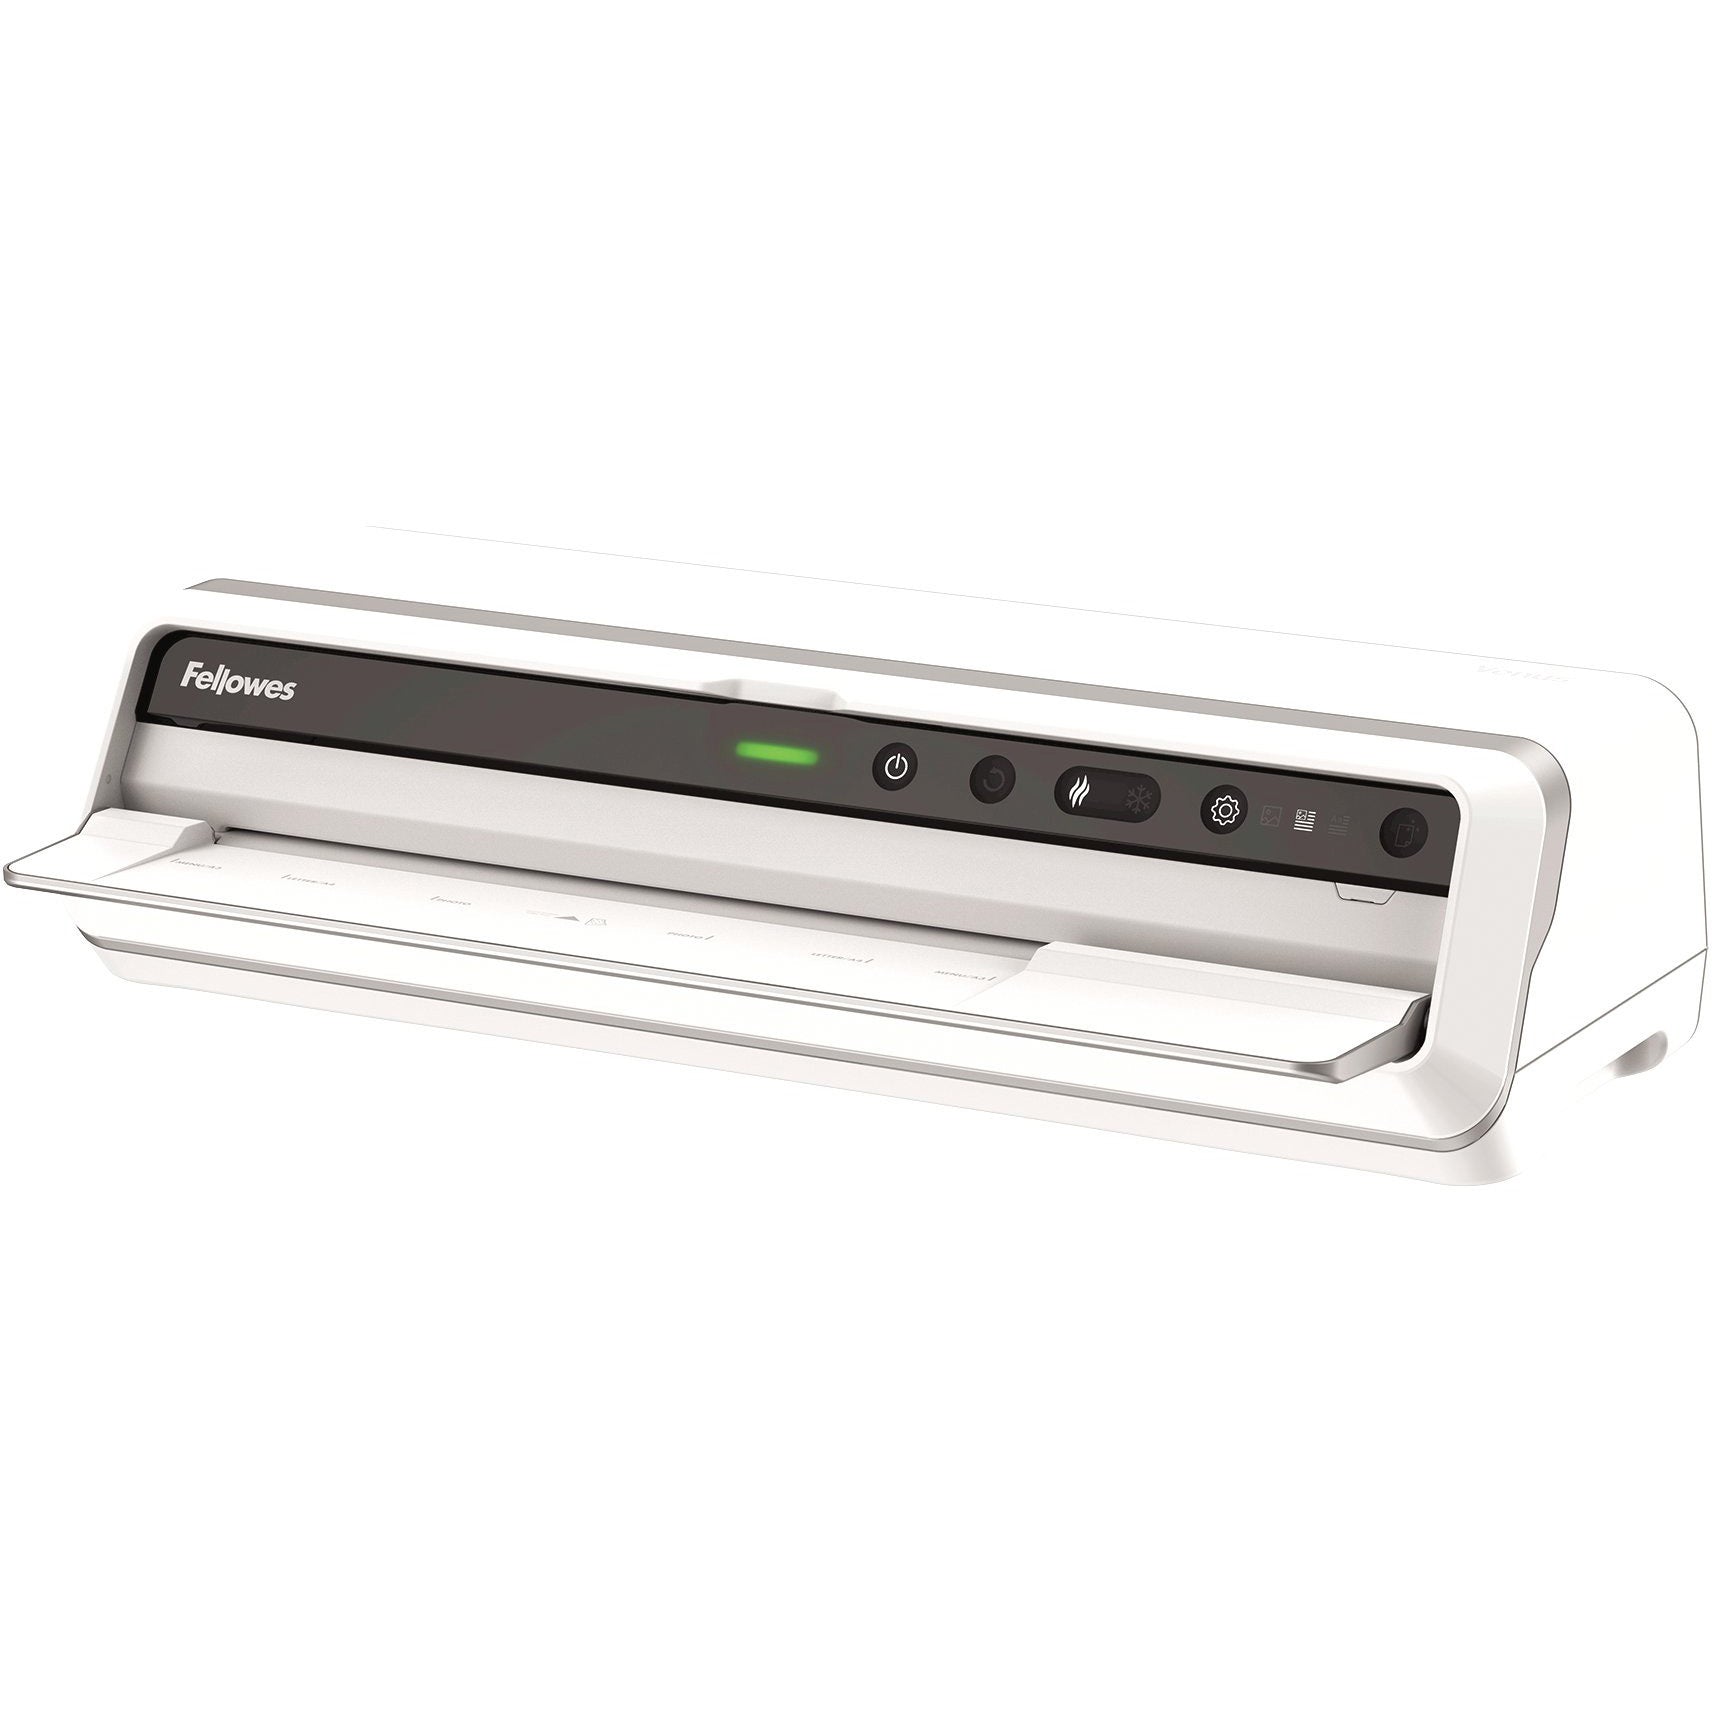 Fellowes Venus 125 Laminator with Pouch Starter Kit, 5746101